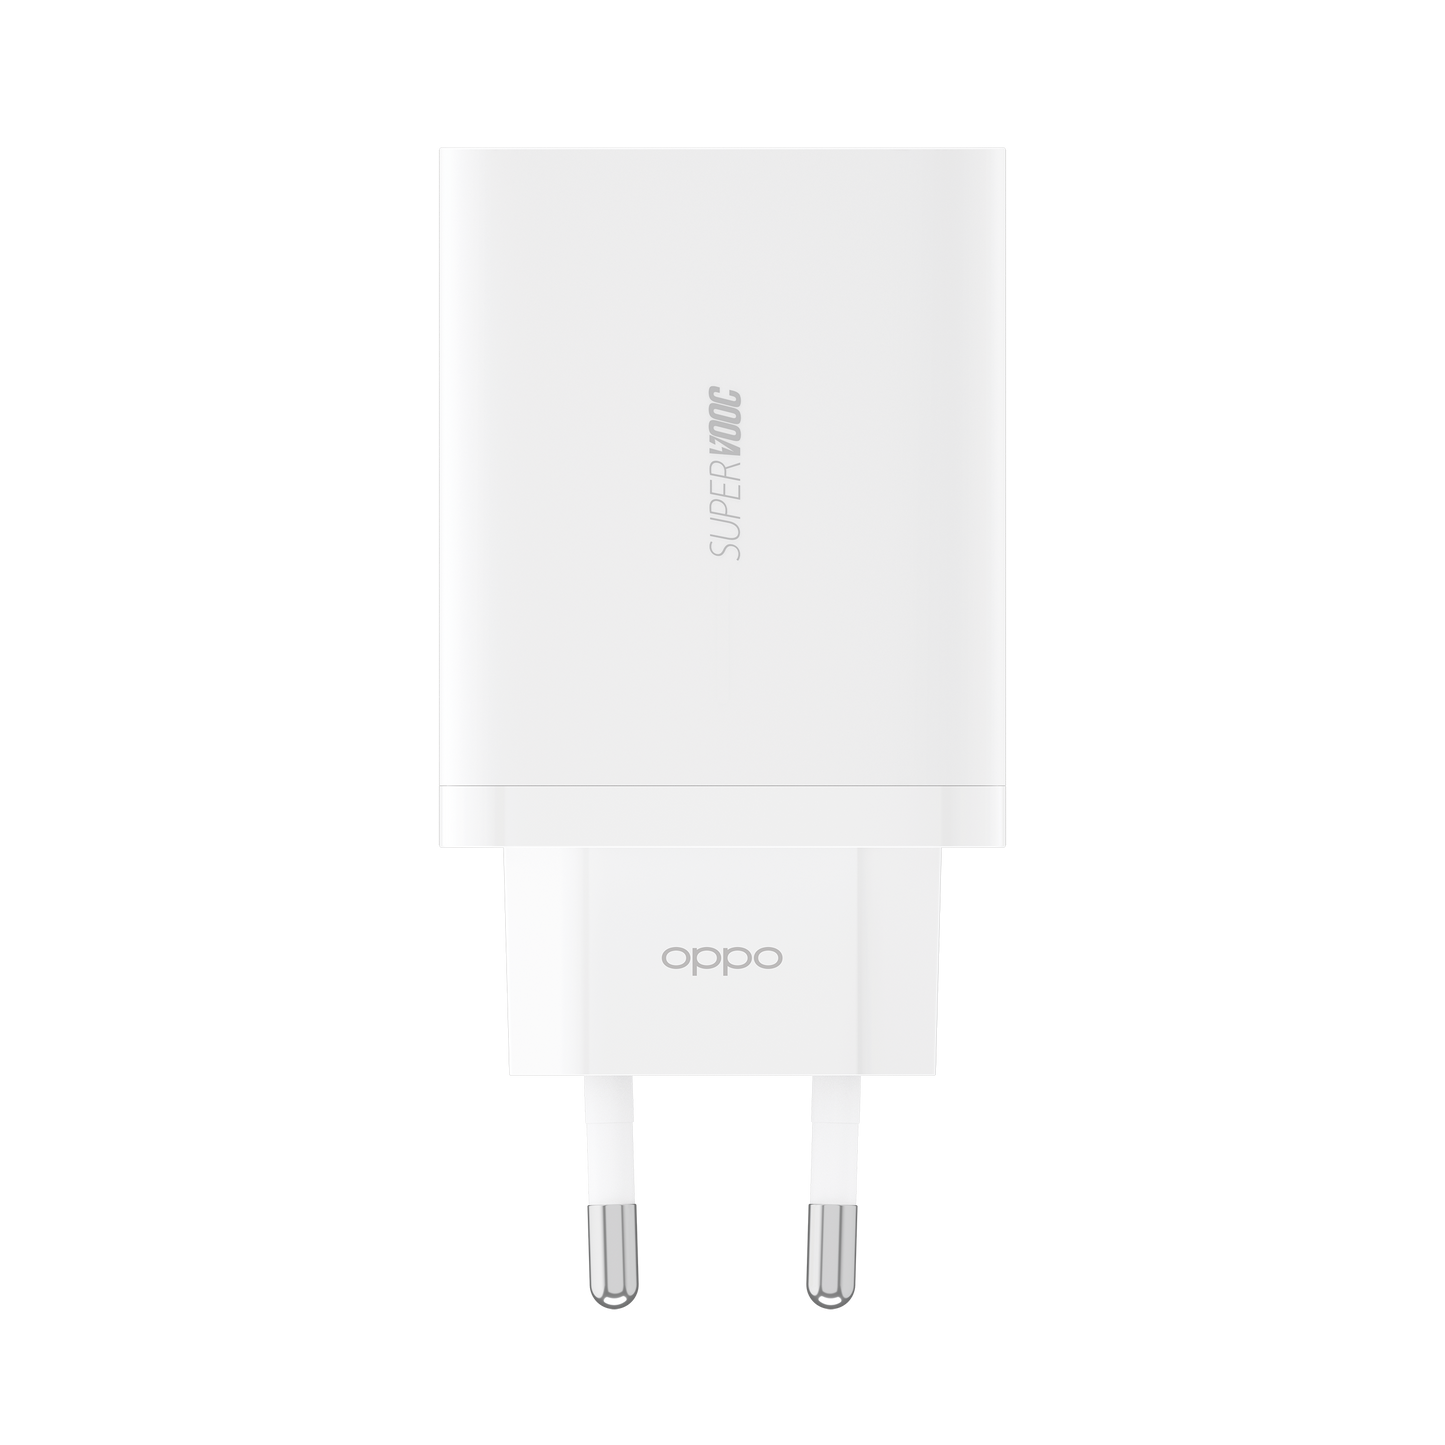 Chargeur OPPO SUPERVOOC 65 W